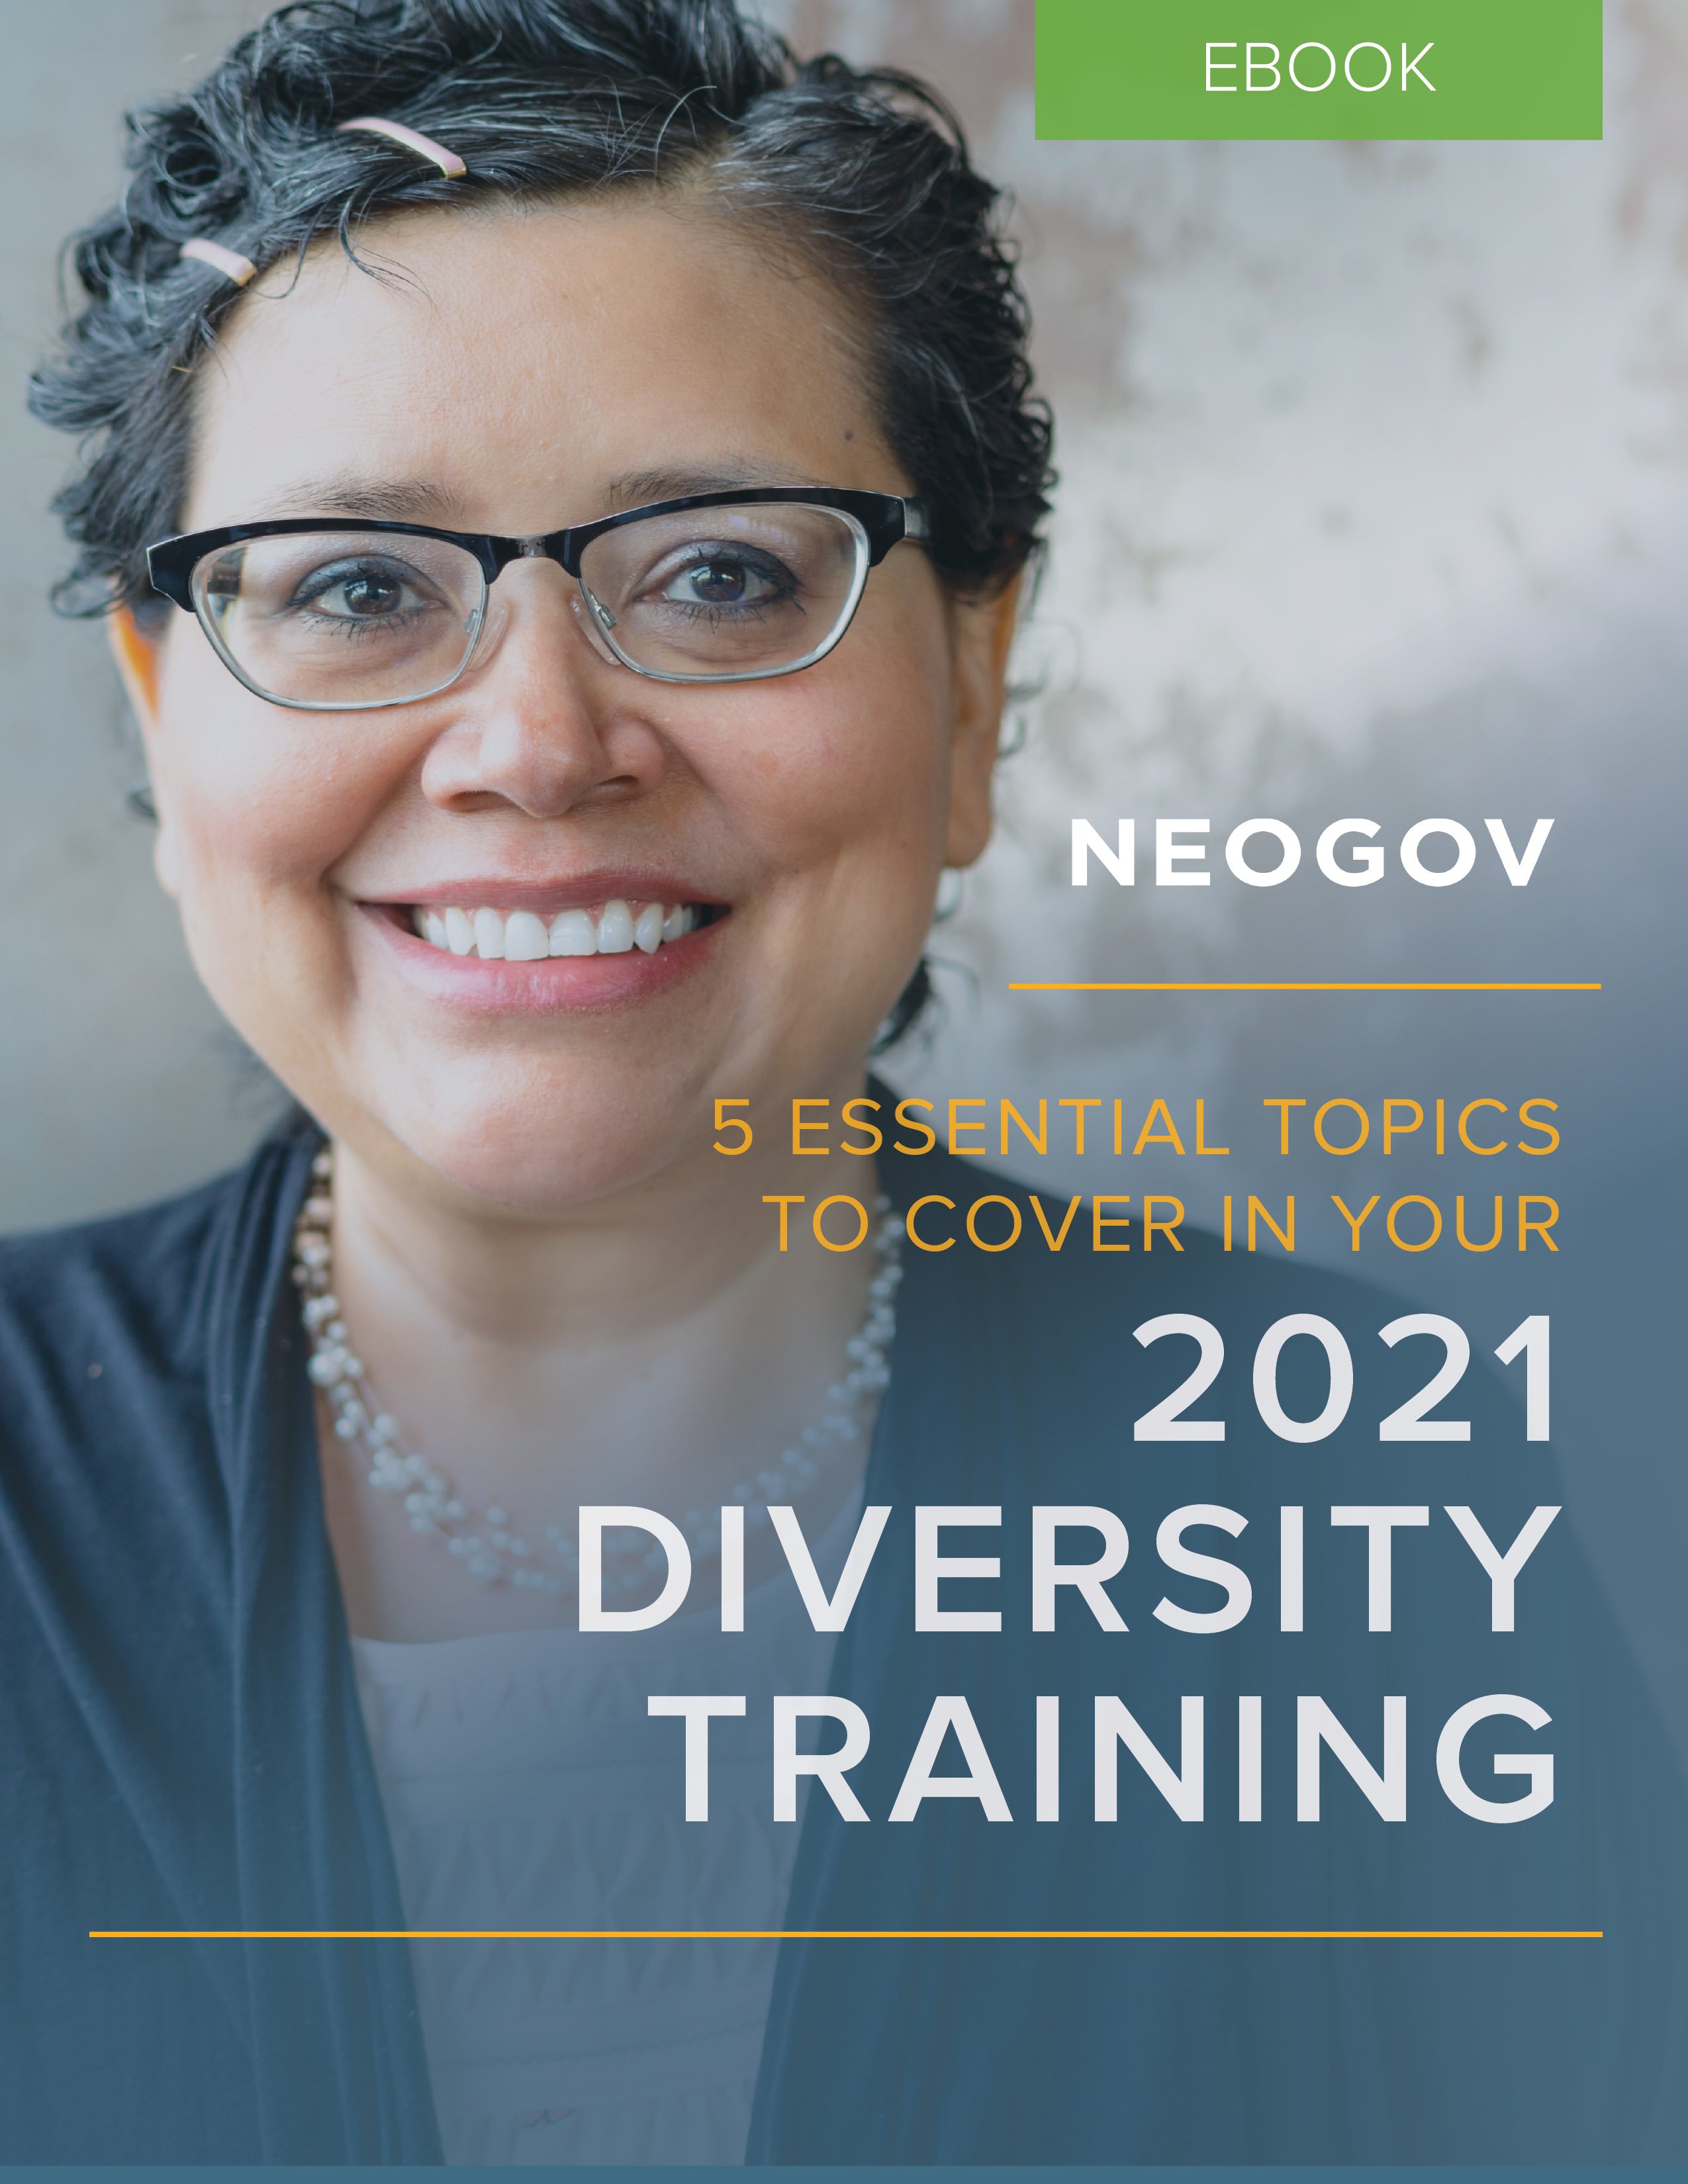 NEOGOV 5 Essential Topics to Cover in Your 2021 Diversity Training